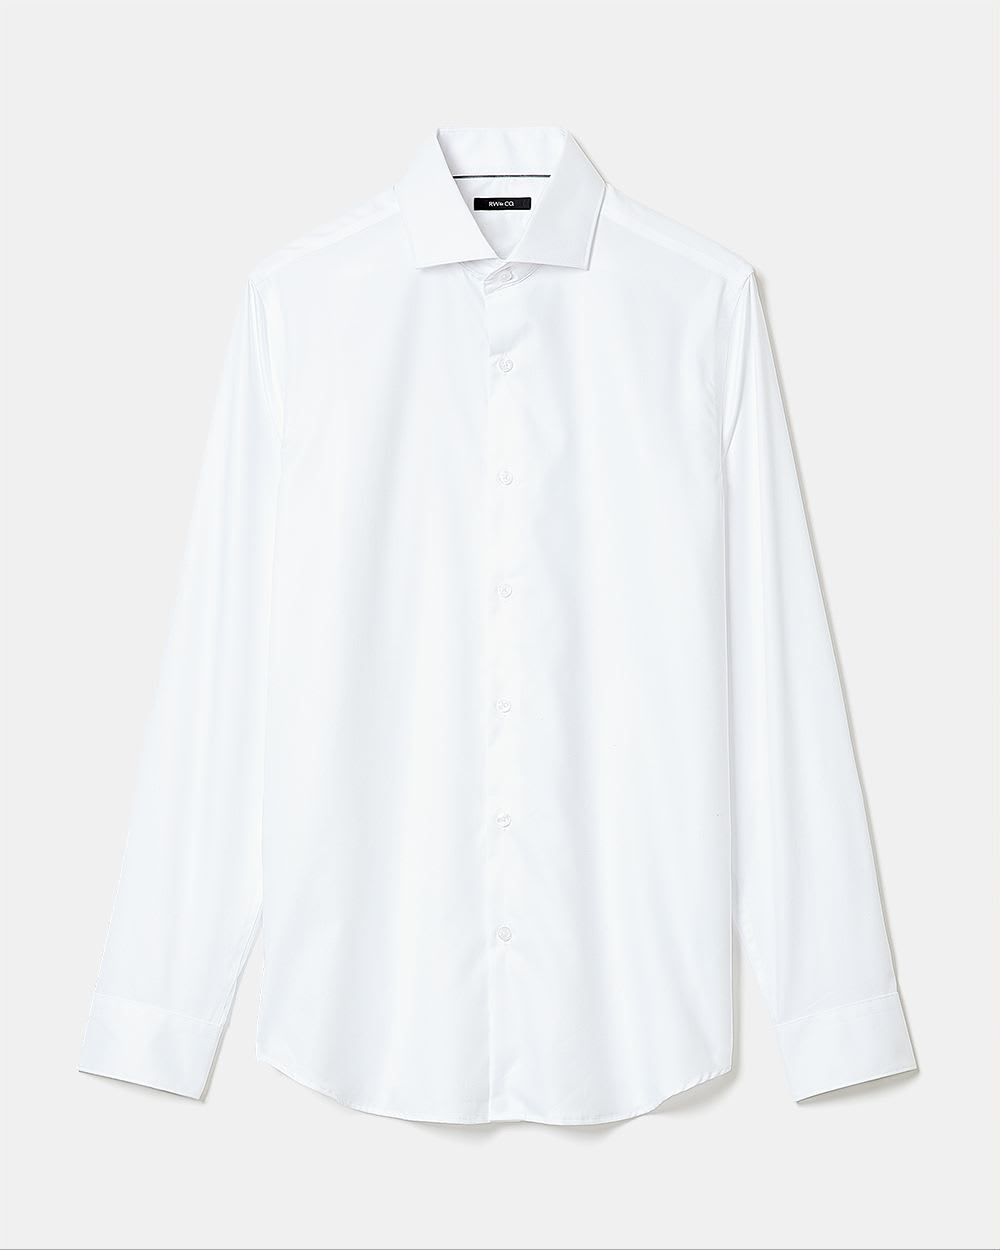 Slim fit dress shirt with wide spread collar | RW&CO.